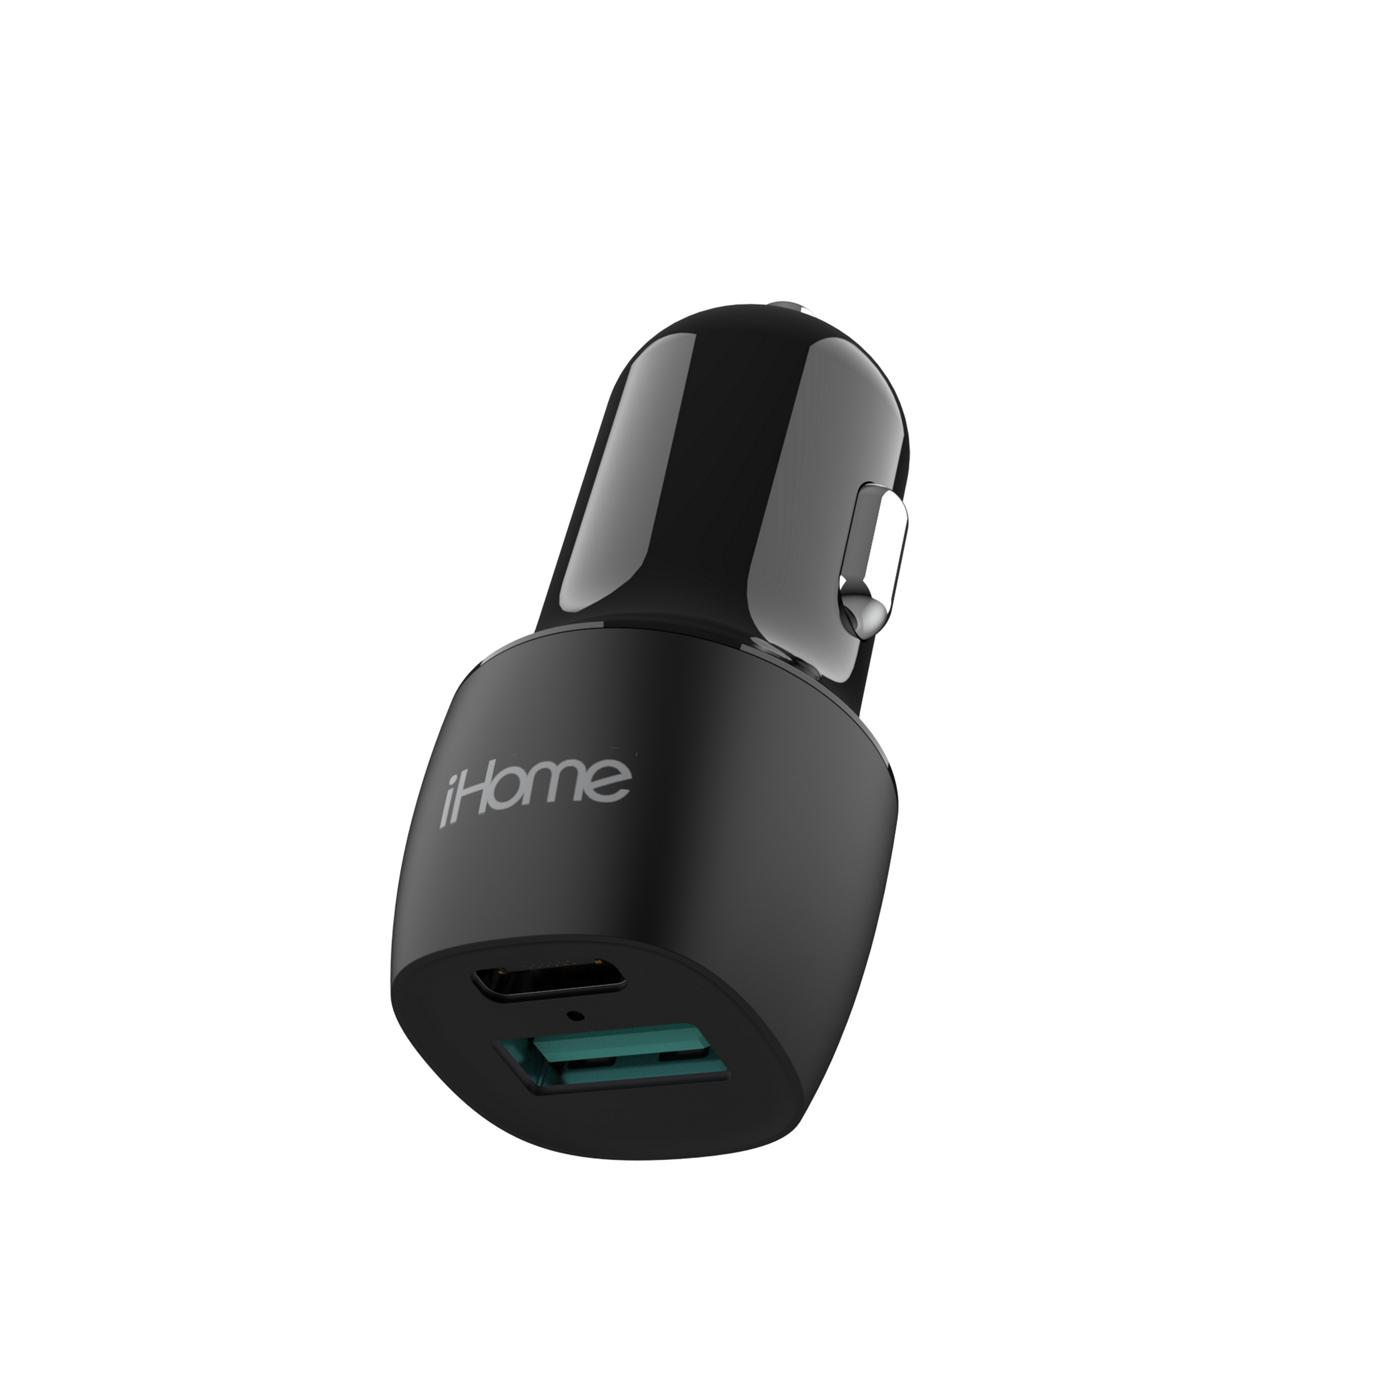 iHome Dual Port Rapid Car Charger - Black; image 2 of 2